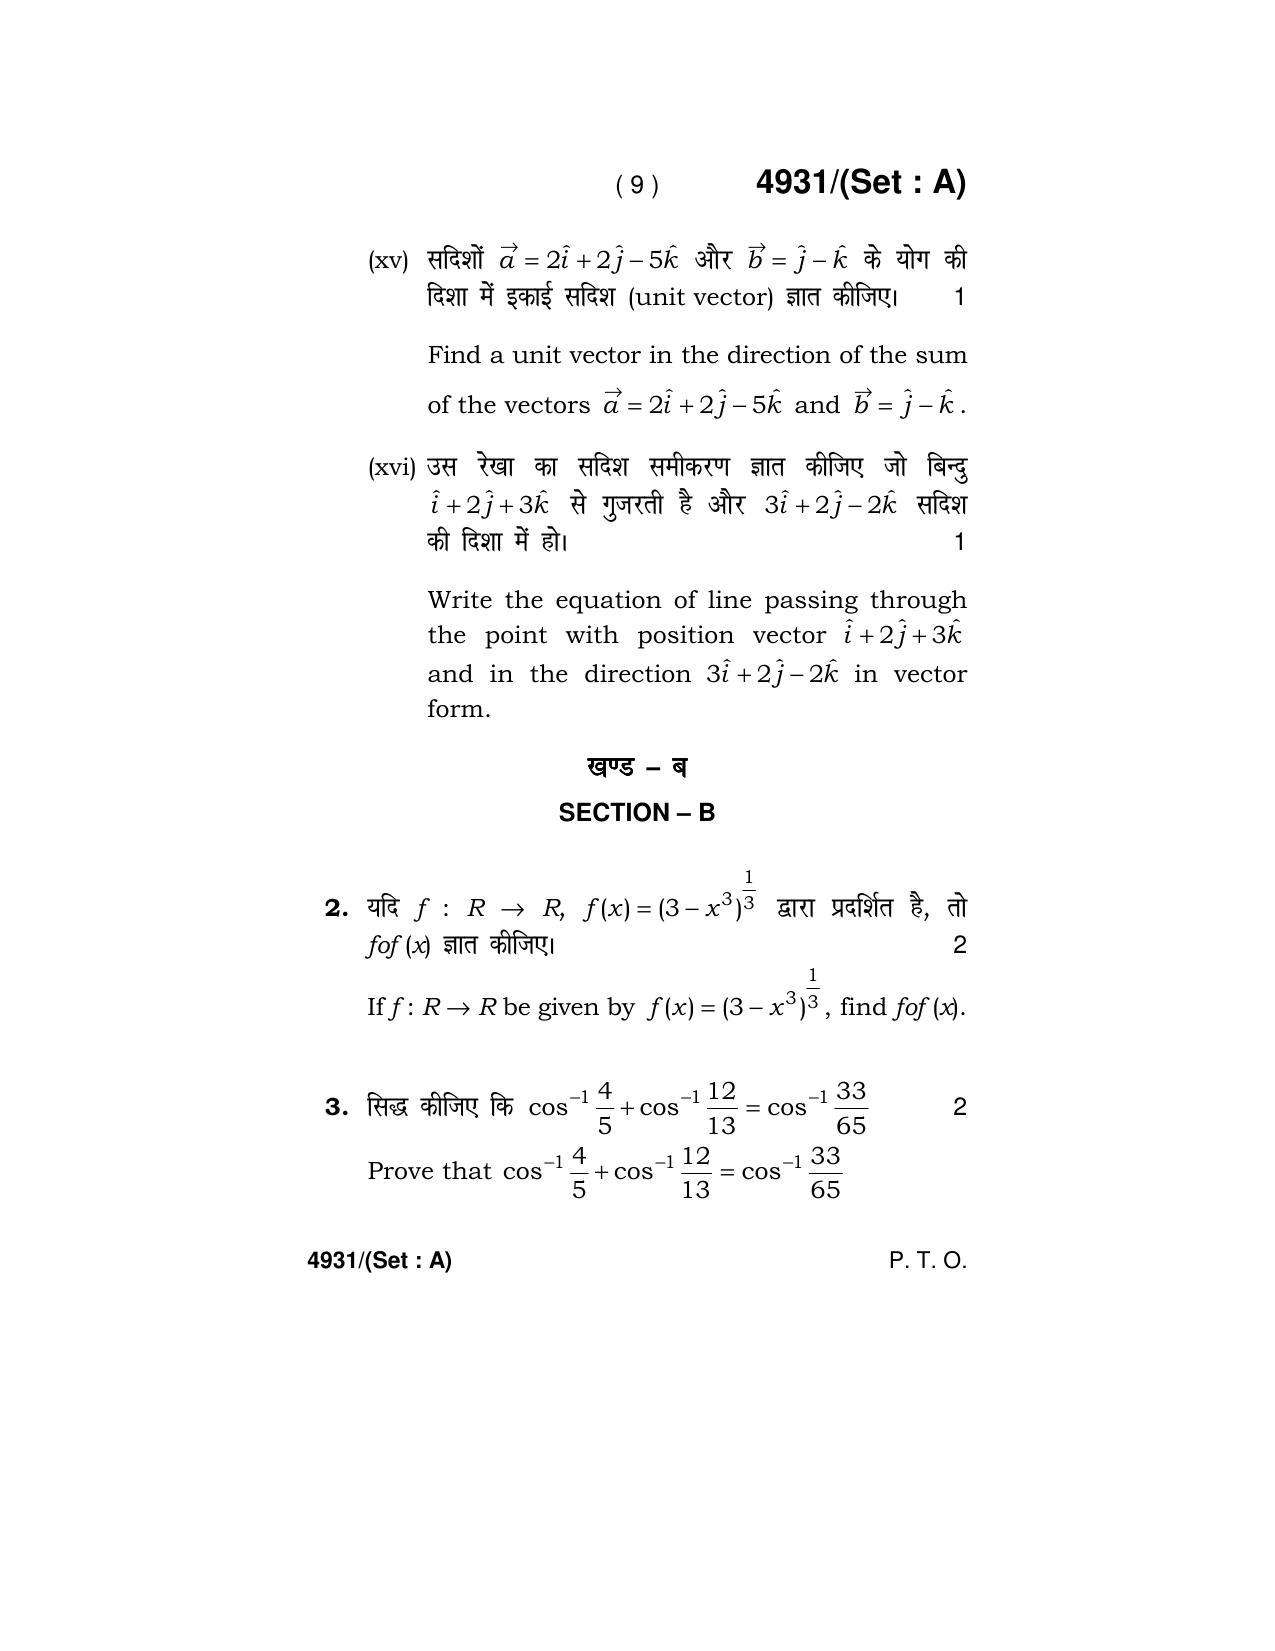 Haryana Board HBSE Class 12 Mathematics 2020 Question Paper - Page 9